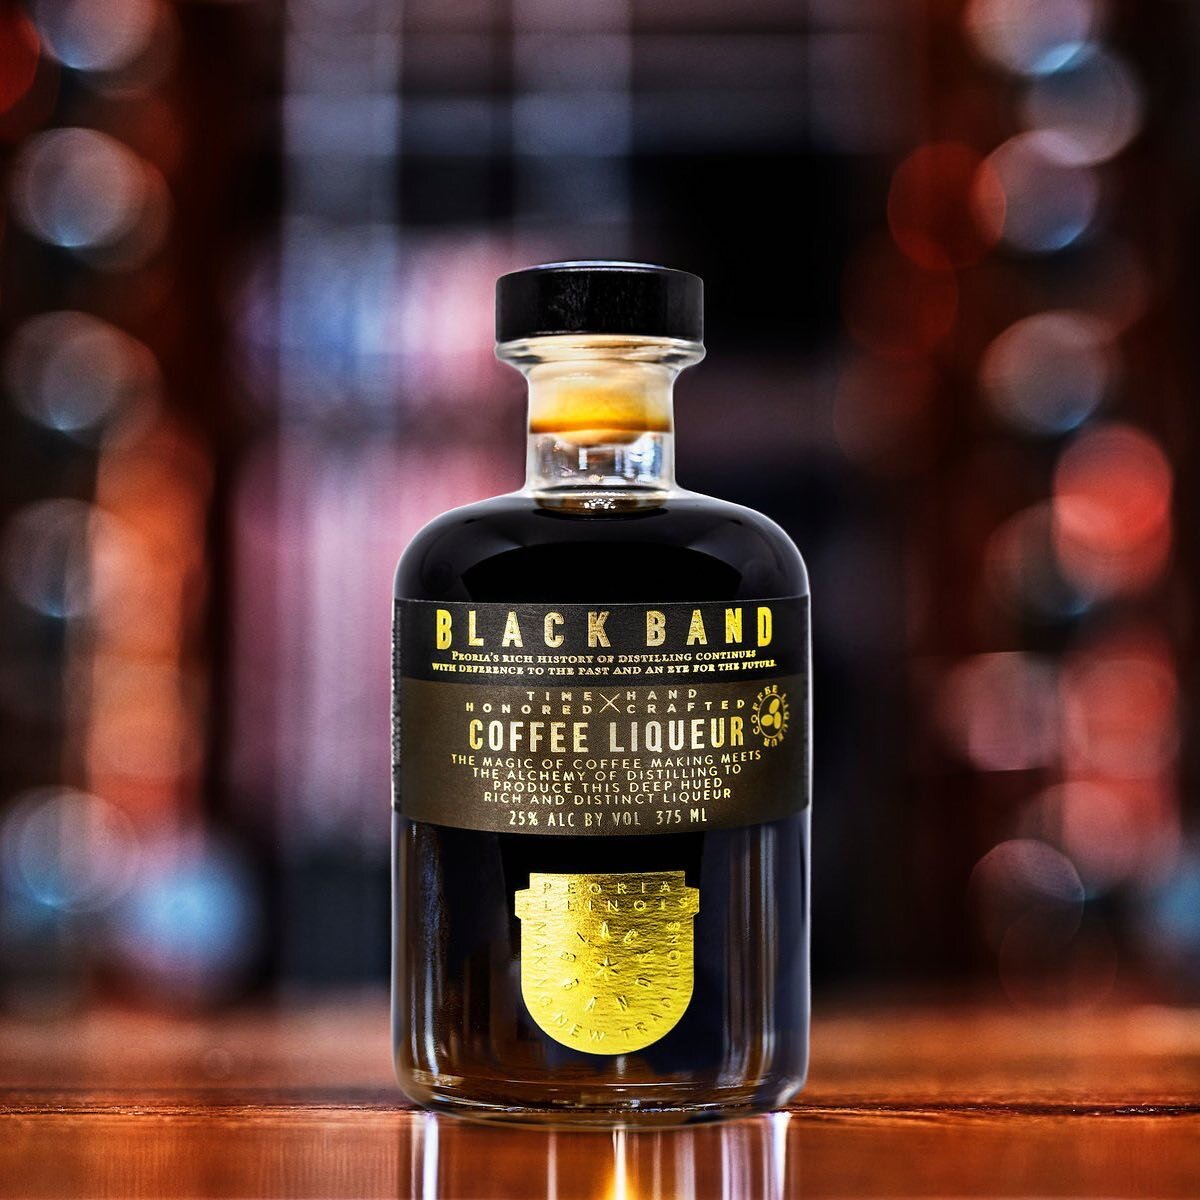 Meet the 2022 San Francisco World Spirits Competition DOUBLE GOLD medal winning Coffee Liqueur. This liqueur boasts rich notes of cocoa, caramel and brown sugar with a balanced sweetness imparted with organic sugar.

In collaboration with @zioncoffee